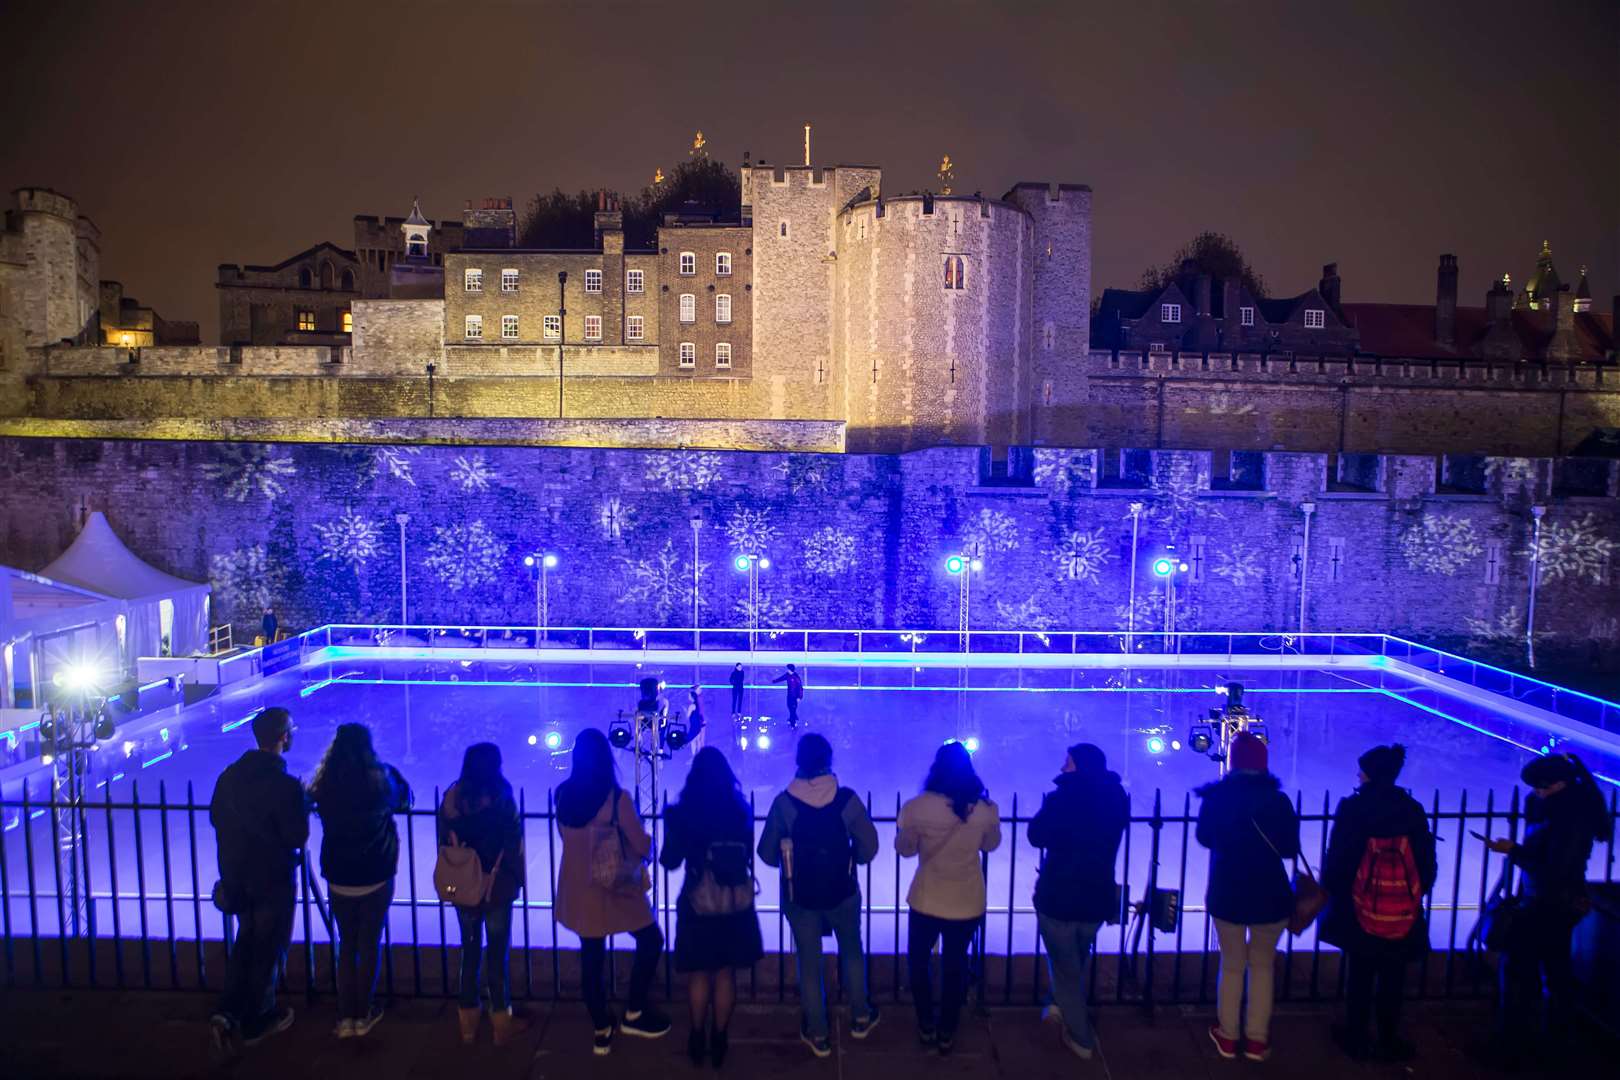 Ice skating will be back at the Tower of London